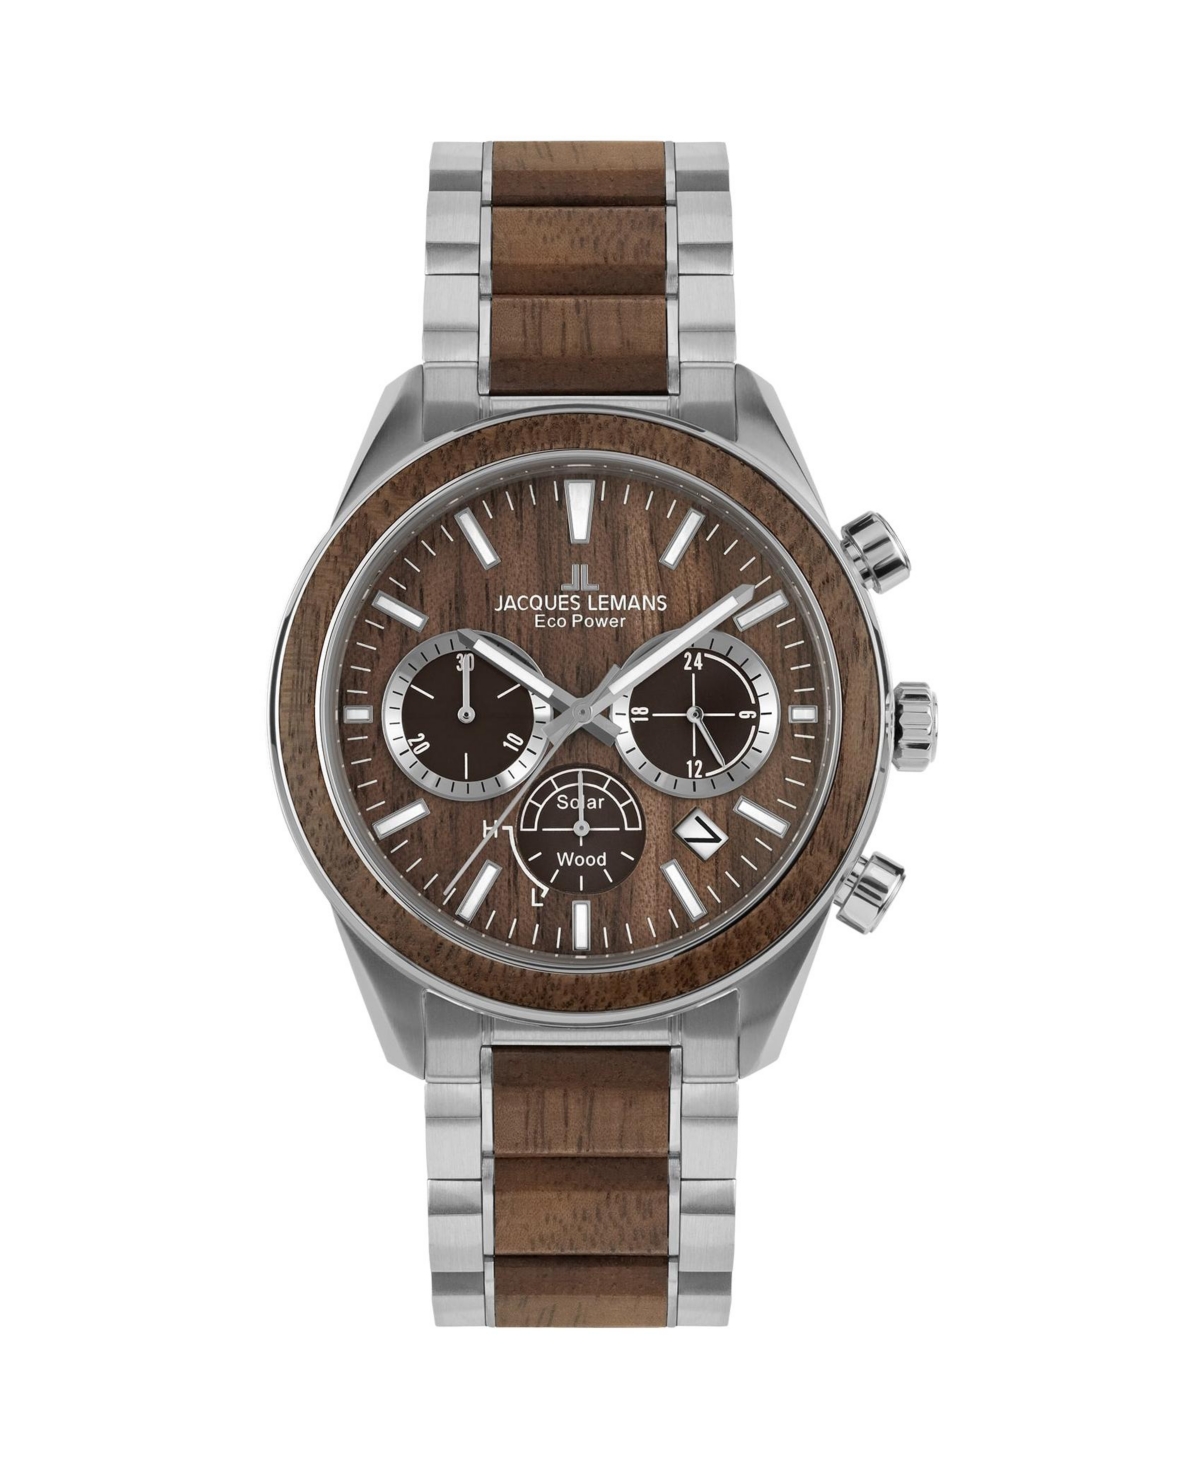 Men's Eco Power Watch with Solid Stainless Steel / Wood Inlay Strap, Chronograph 1-2115 - Brown